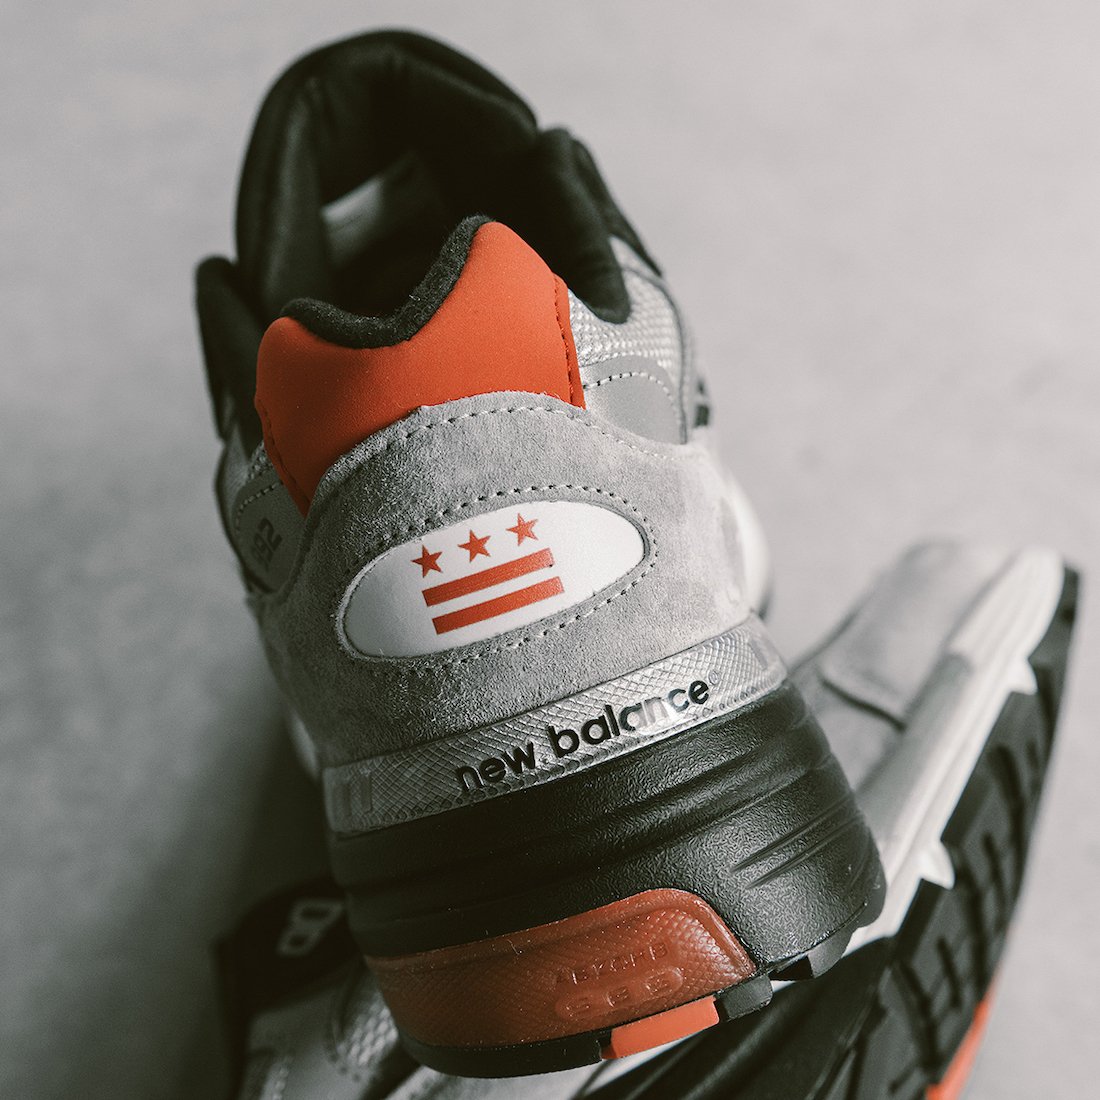 DTLR New Balance 992 Discover Celebrate Release Date Info